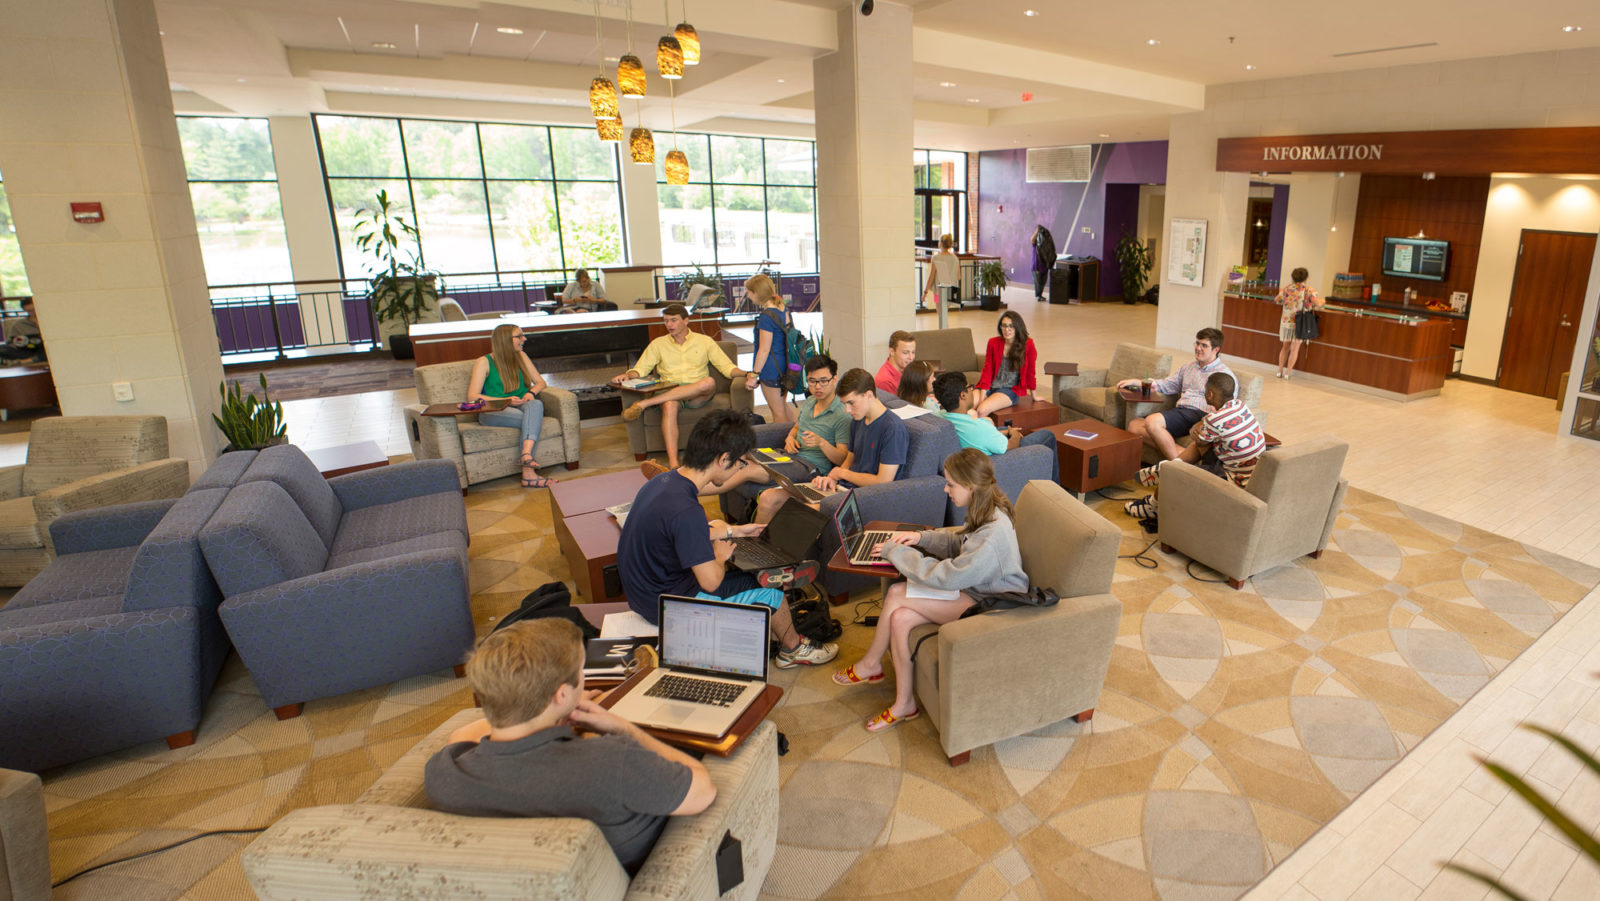 Trone student center pictured with multiple students working